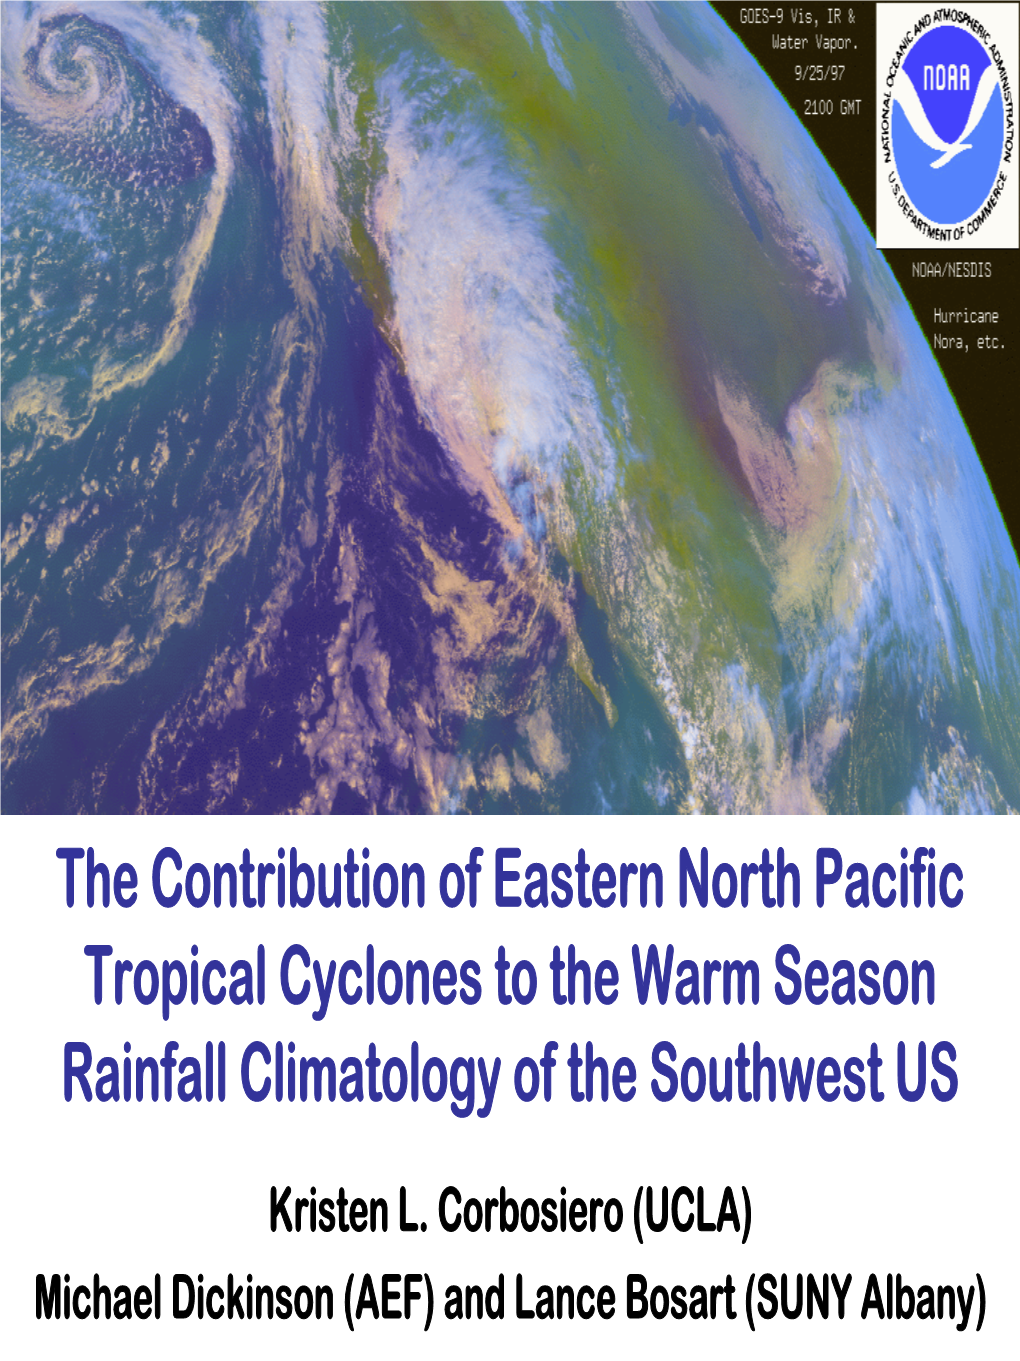 The Contribution of Eastern North Pacific Tropical Cyclones to the Warm Season Rainfall Climatology of the Southwest US